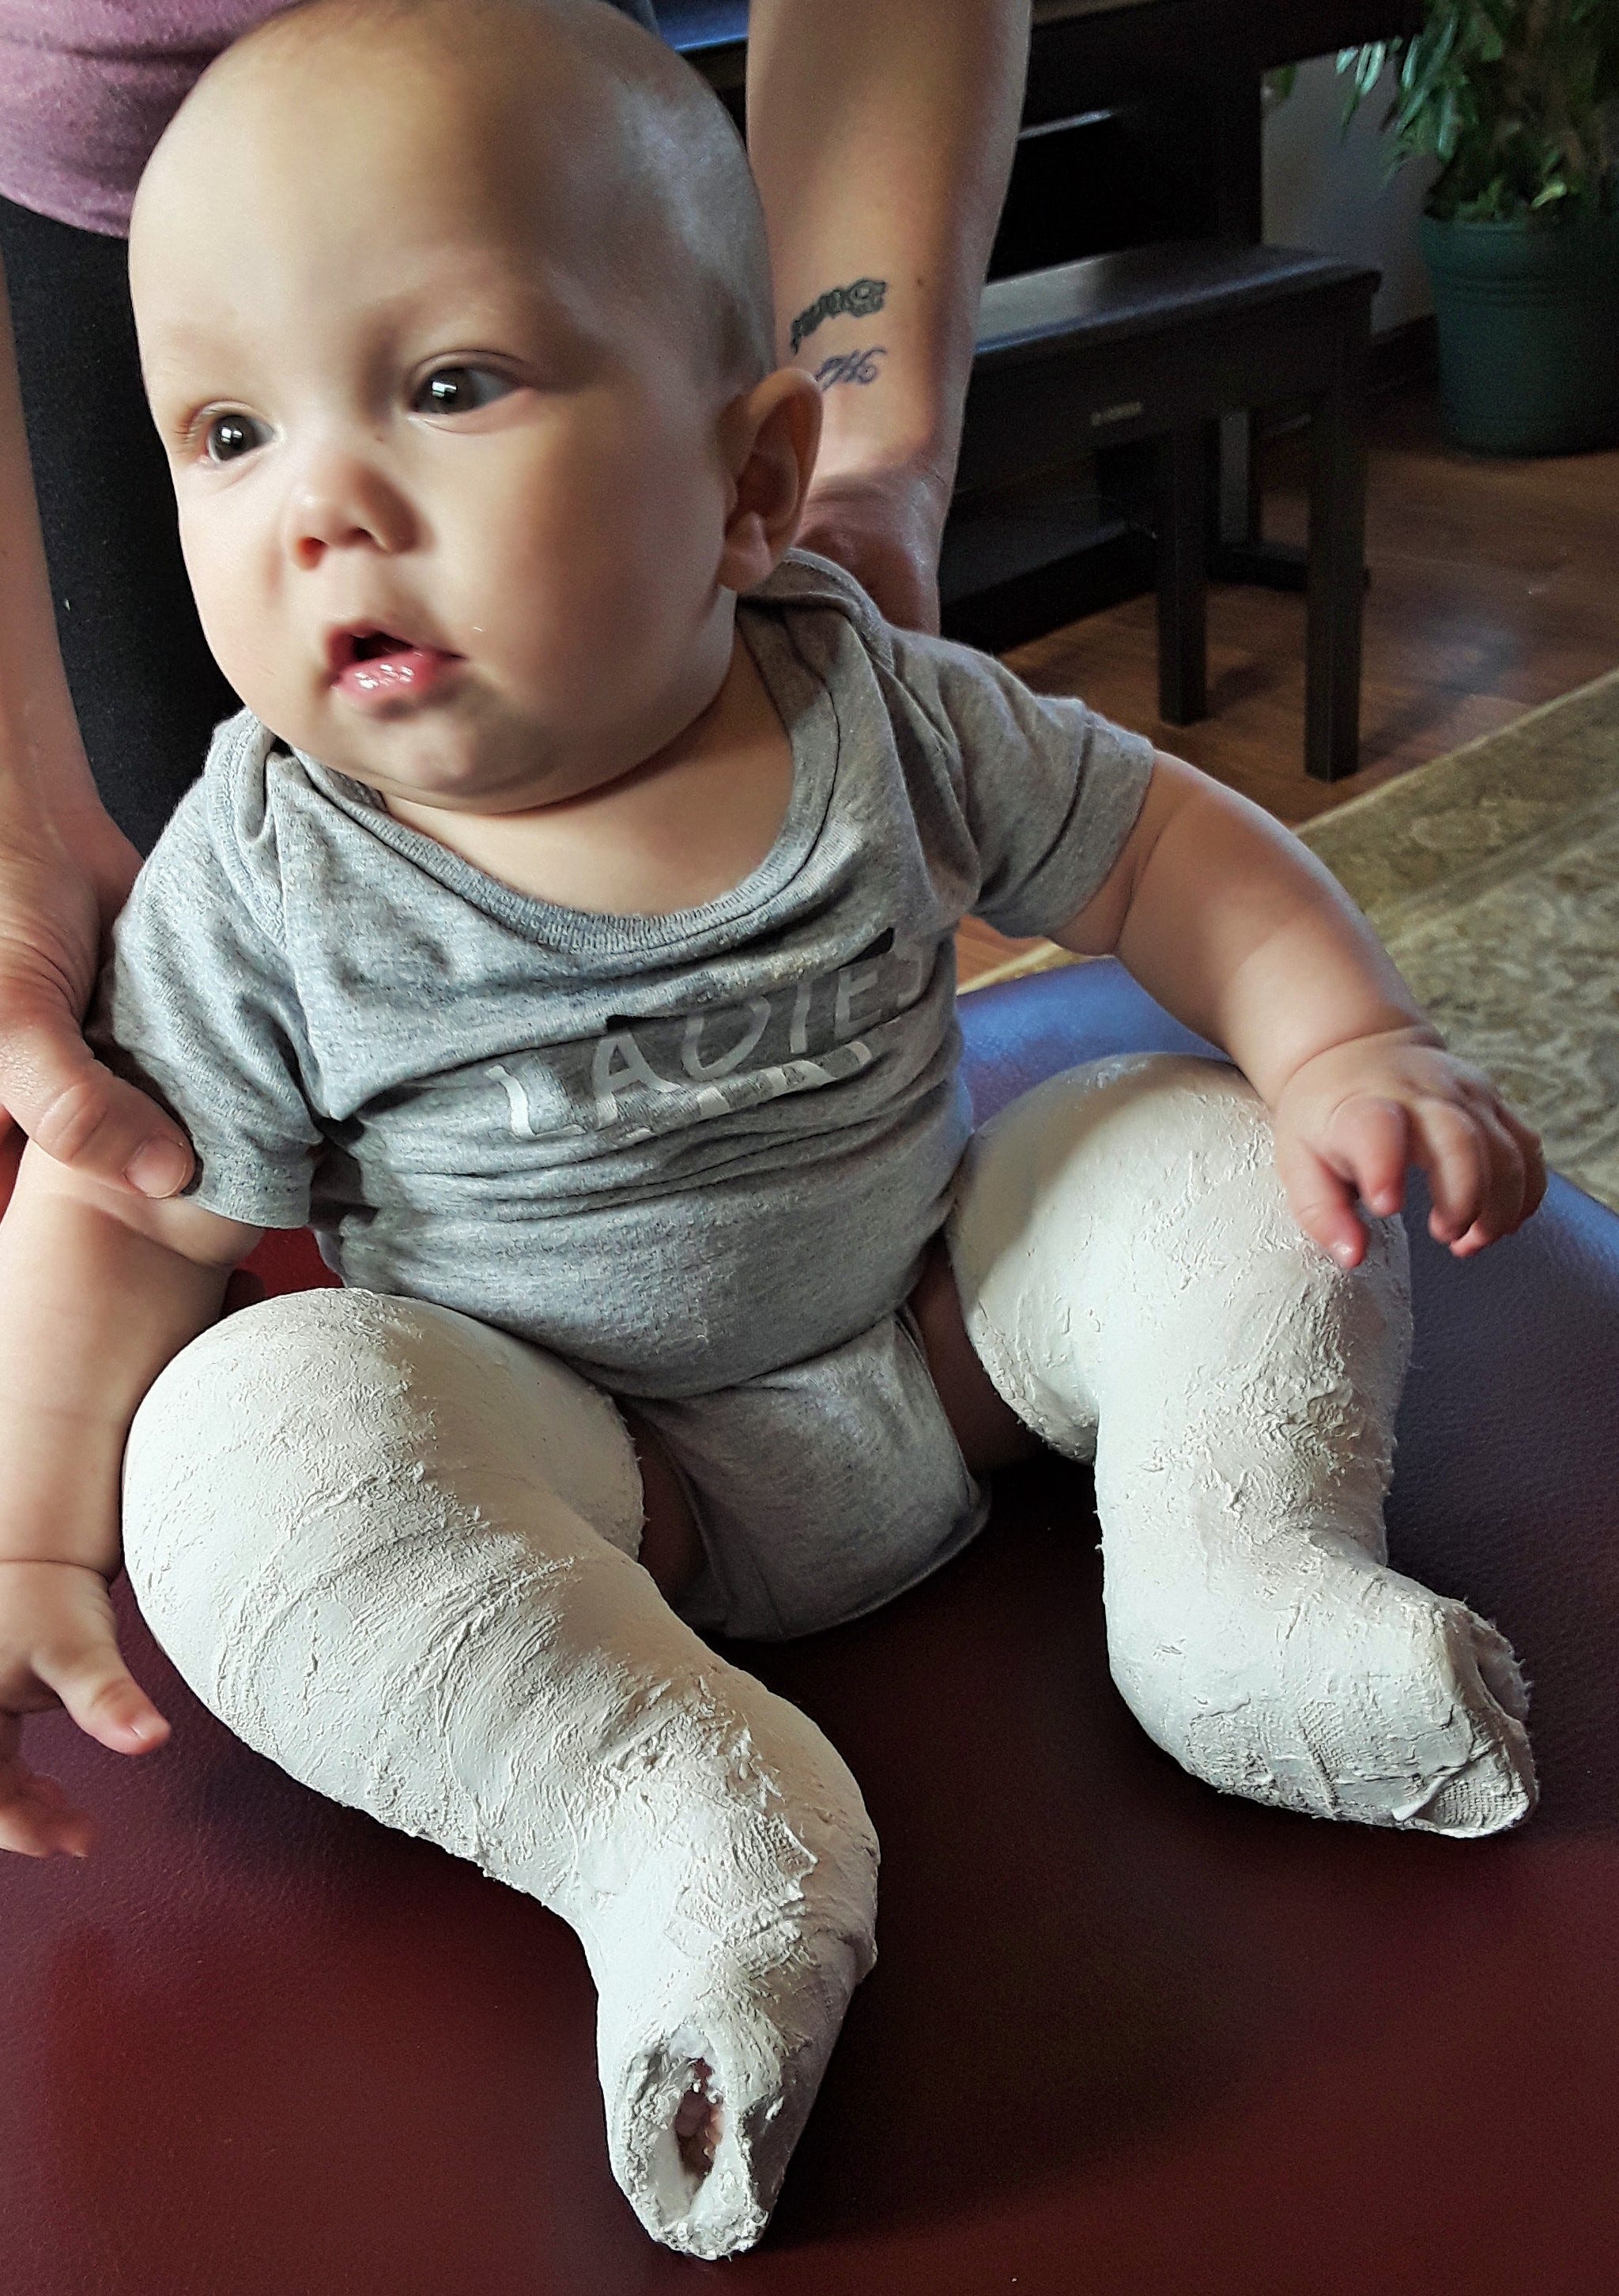 Clubfoot Treatment At Uihc Providing New Hope For Canadian Boy